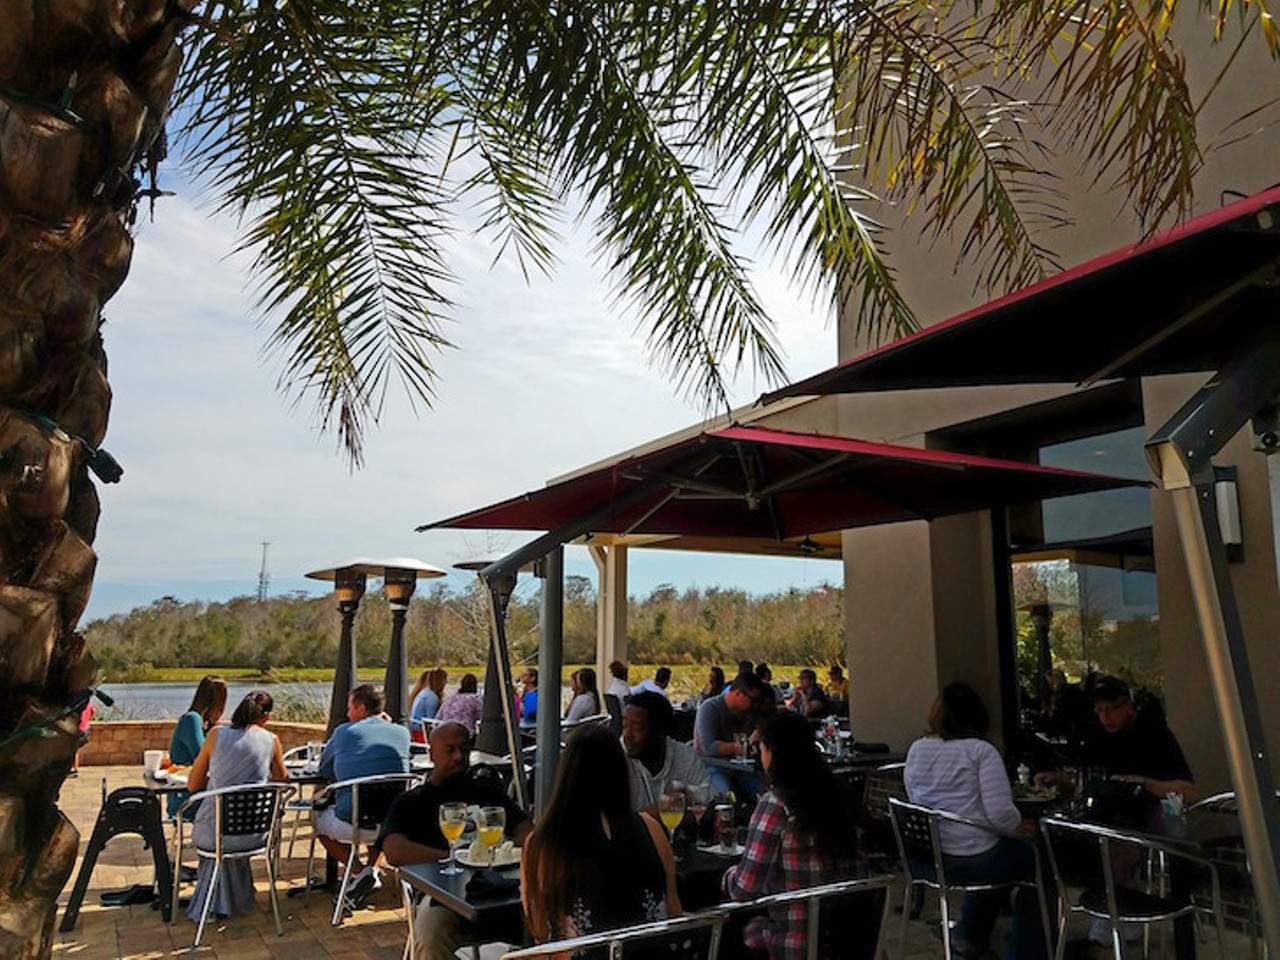 310 Nona
10785 Narcoossee Road, 407-203-1120
Upscale menu items without the upscale prices make this brunch spot located right on top of Lake Nona a patio dining experience that trumps most. This sister restaurant of 310 Lakeside and 310 Park South has the same bottomless mimosas and even a Saturday brunch happy hour to satisfy any champagne diet.  
Photo via 310 Nona/Facebook